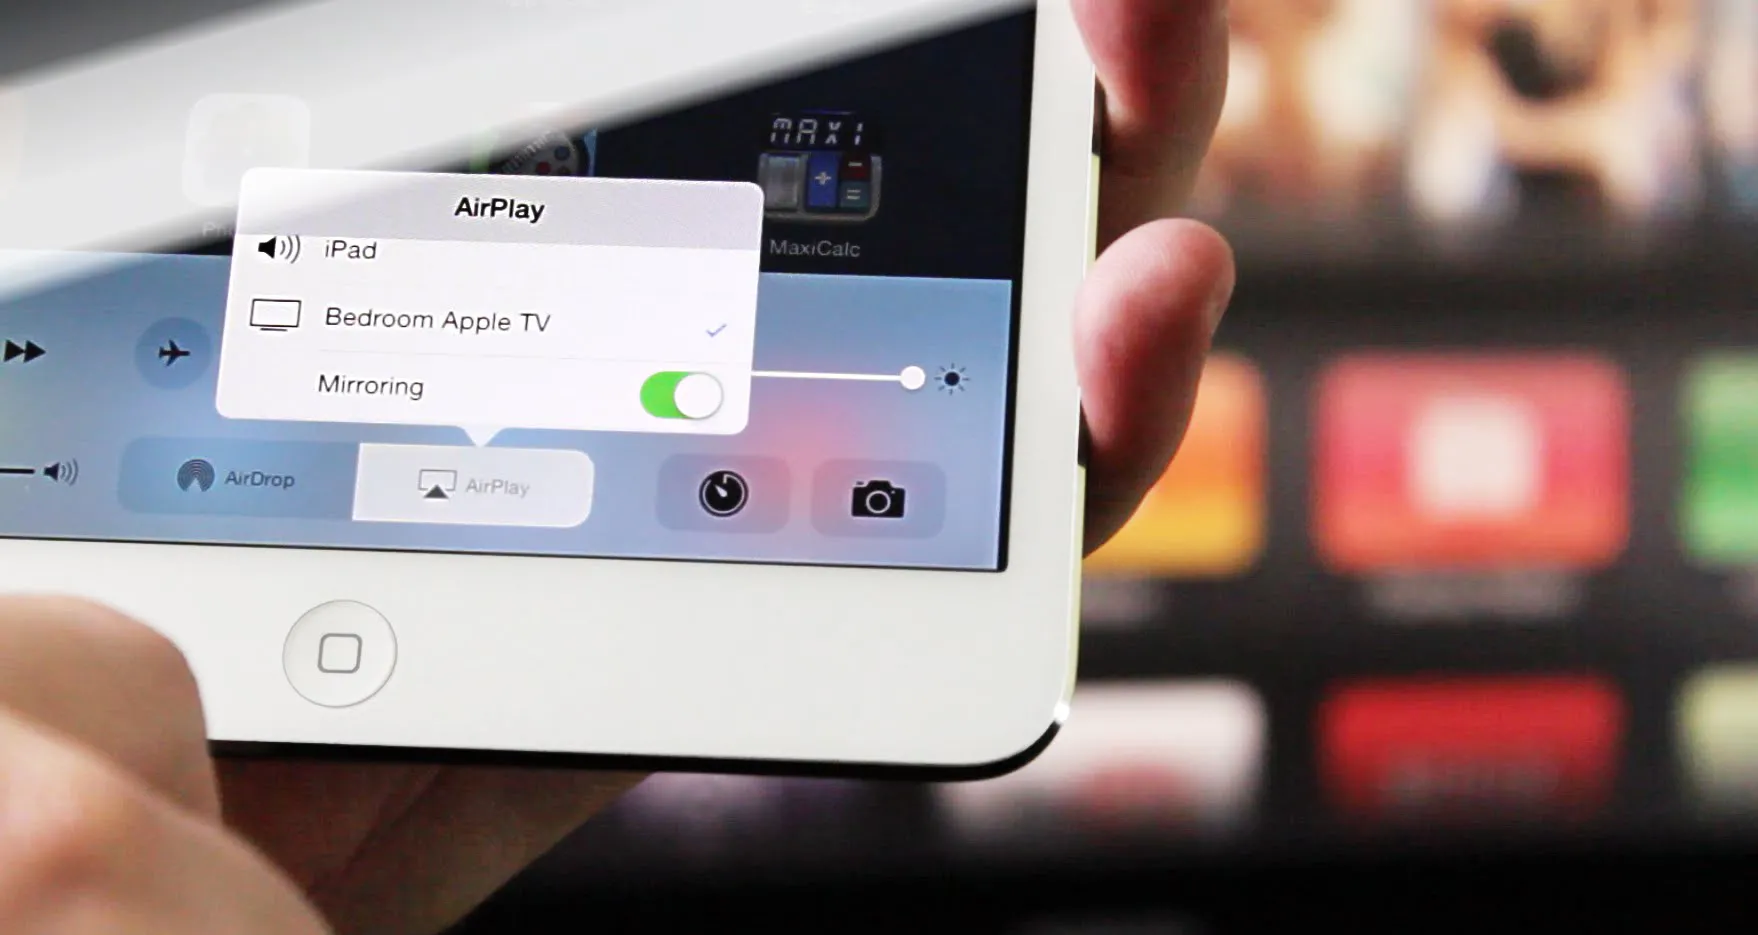 Come usare AirPlay su iPhone